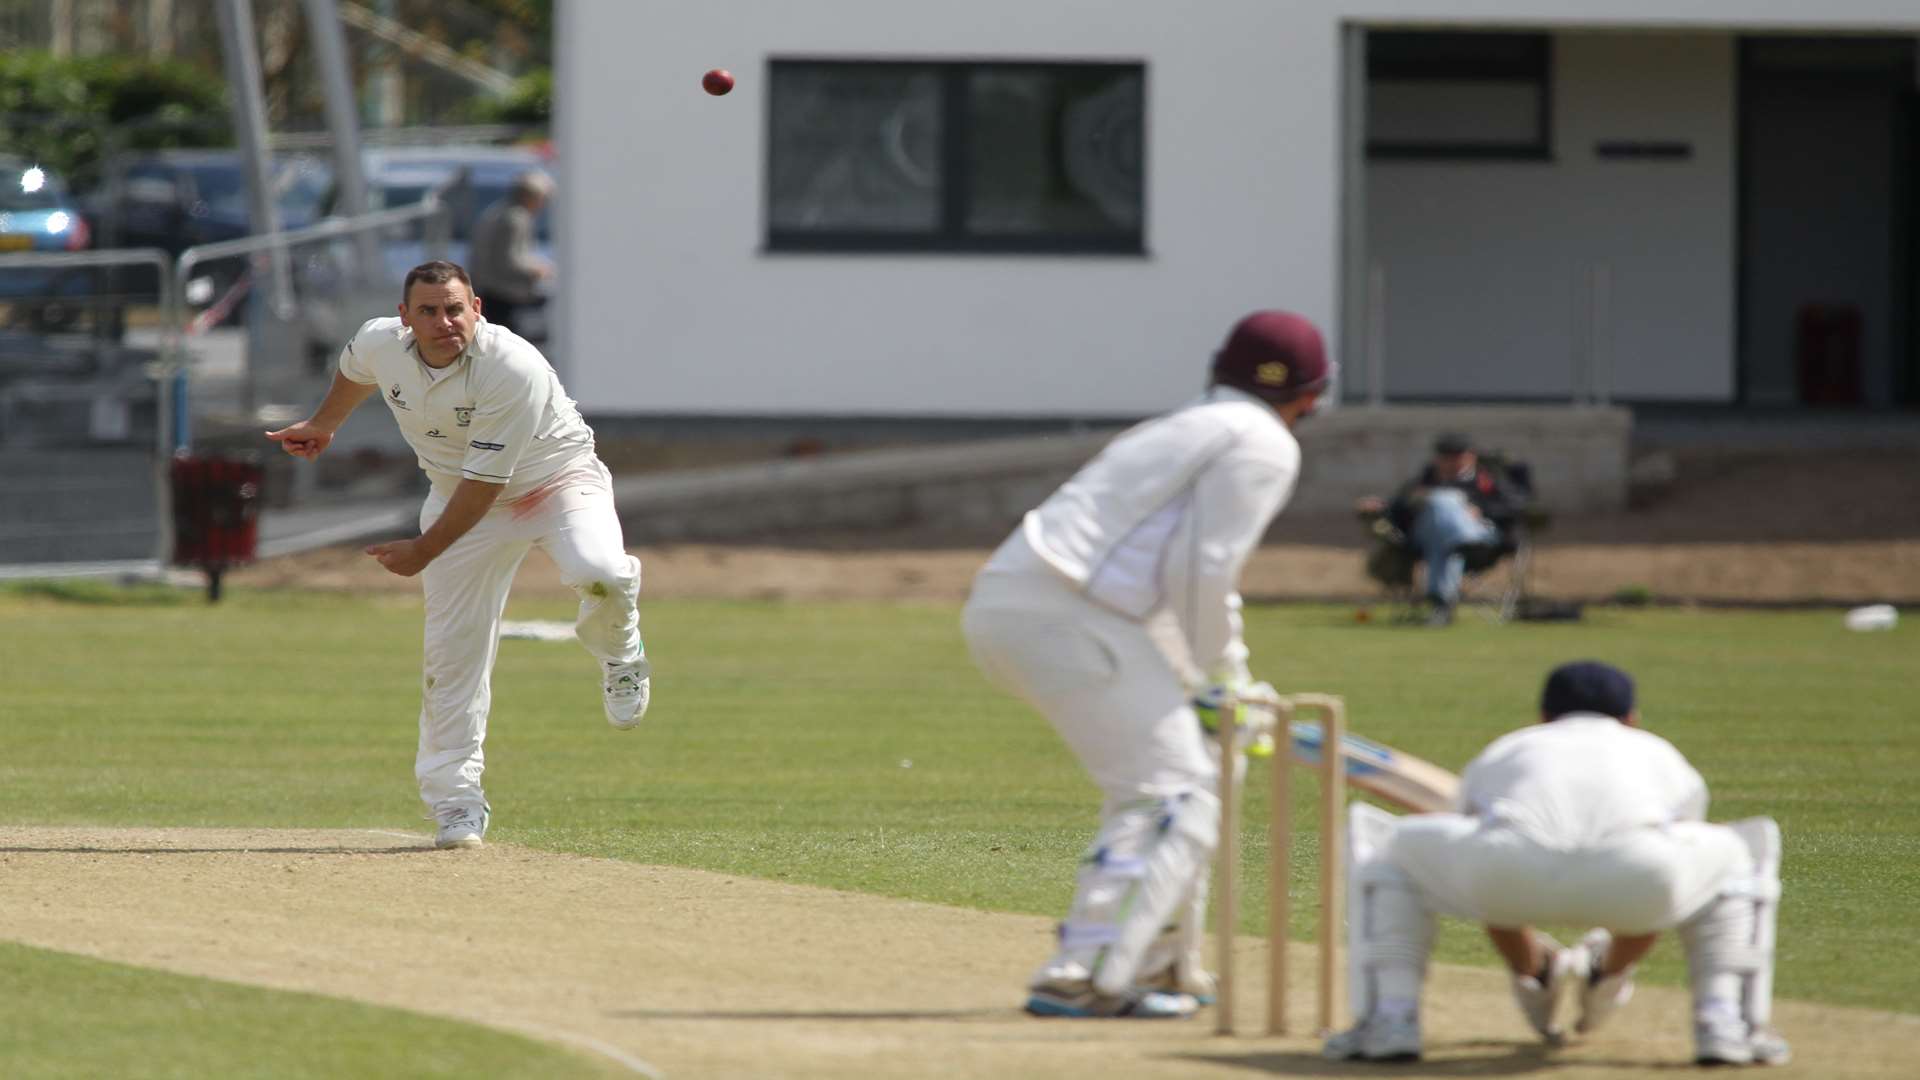 Ross Allen bowls for Dartford in a game against Canterbury